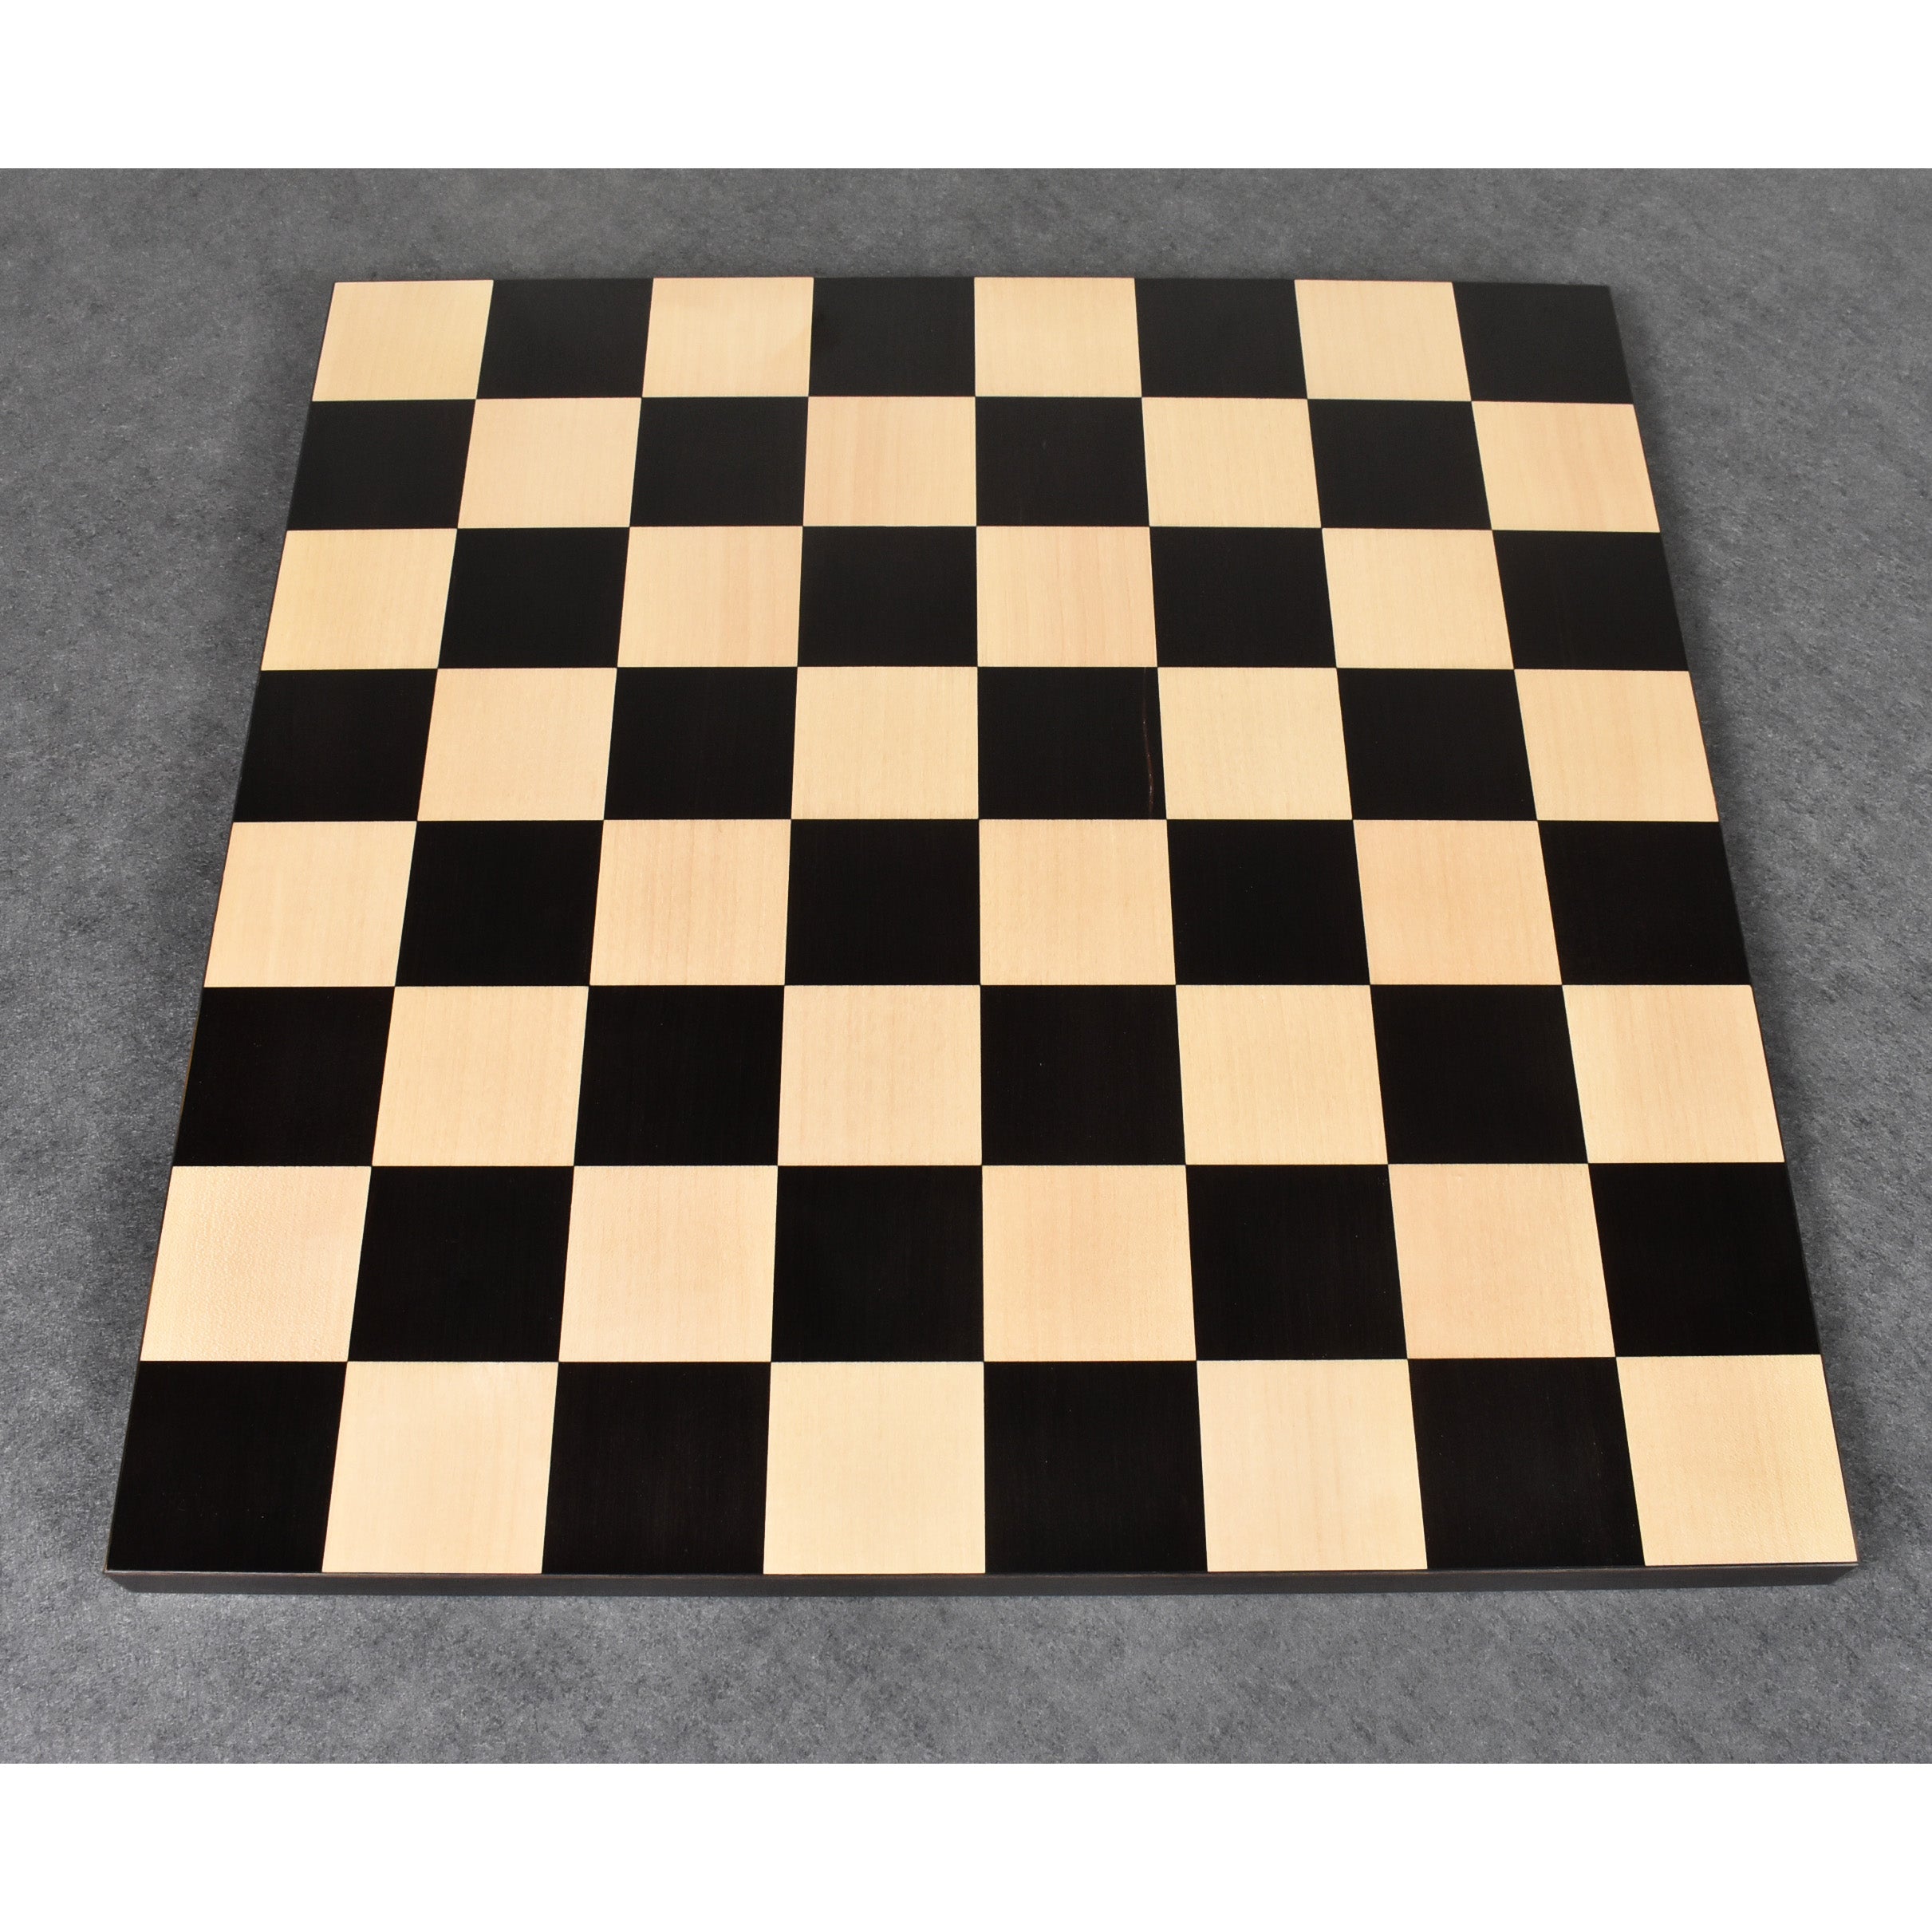 21 Chess Board Bud Rose wood & Maple - STEP BLACK BORDER Hand Carved SQ:  55MM